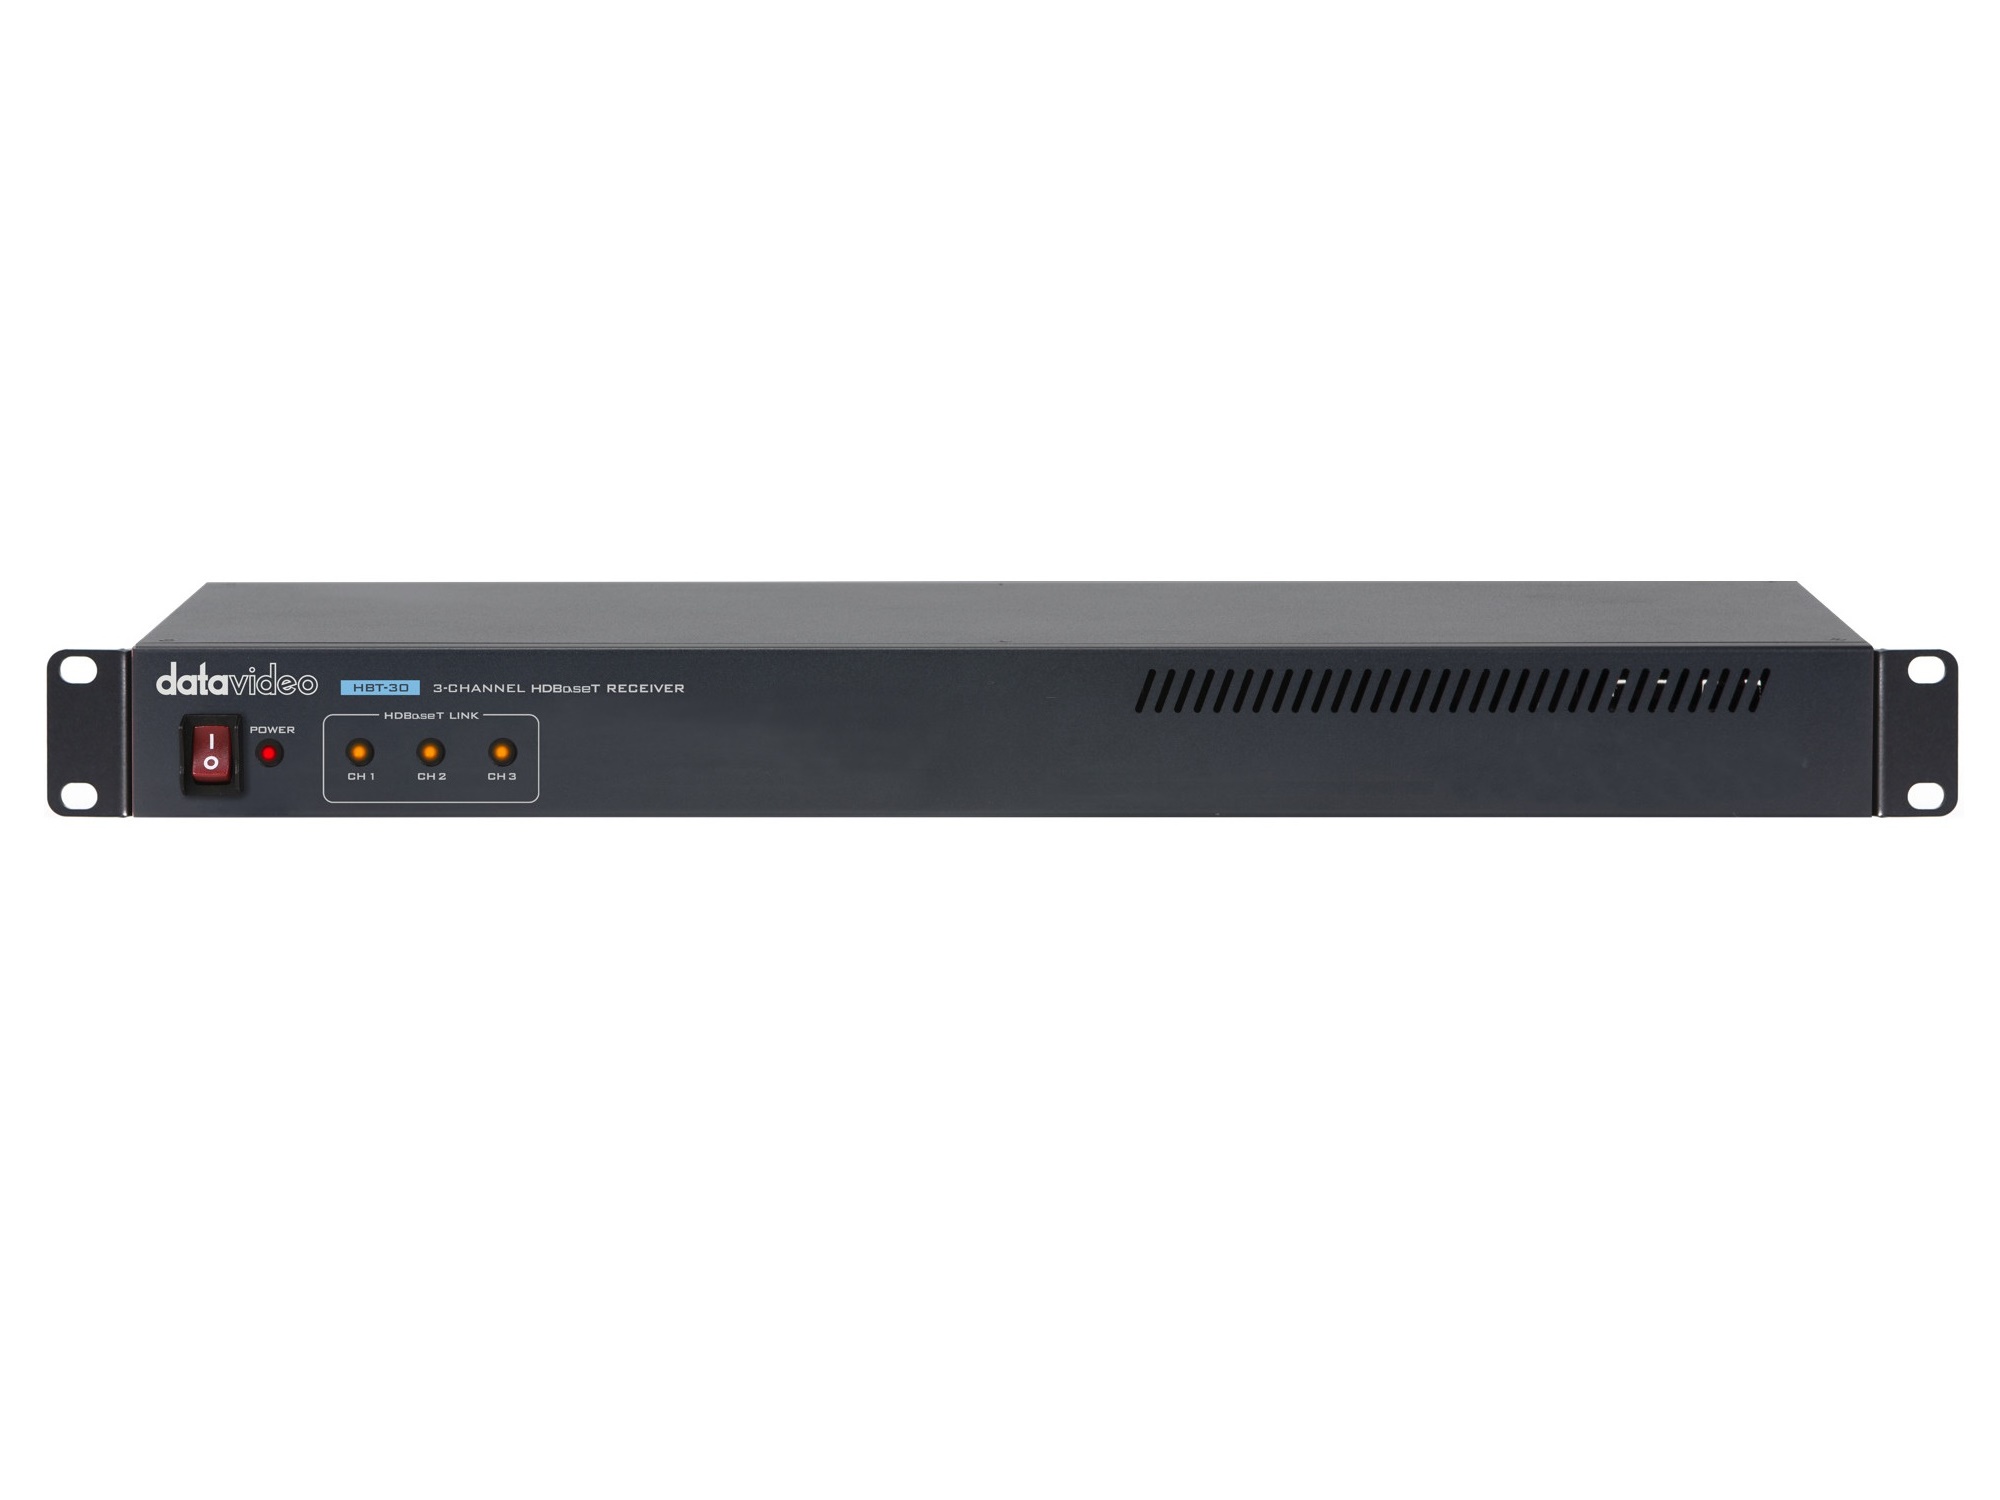 HBT-30 3-Channel HDBaseT Receiver with HDMI Outputs by Datavideo